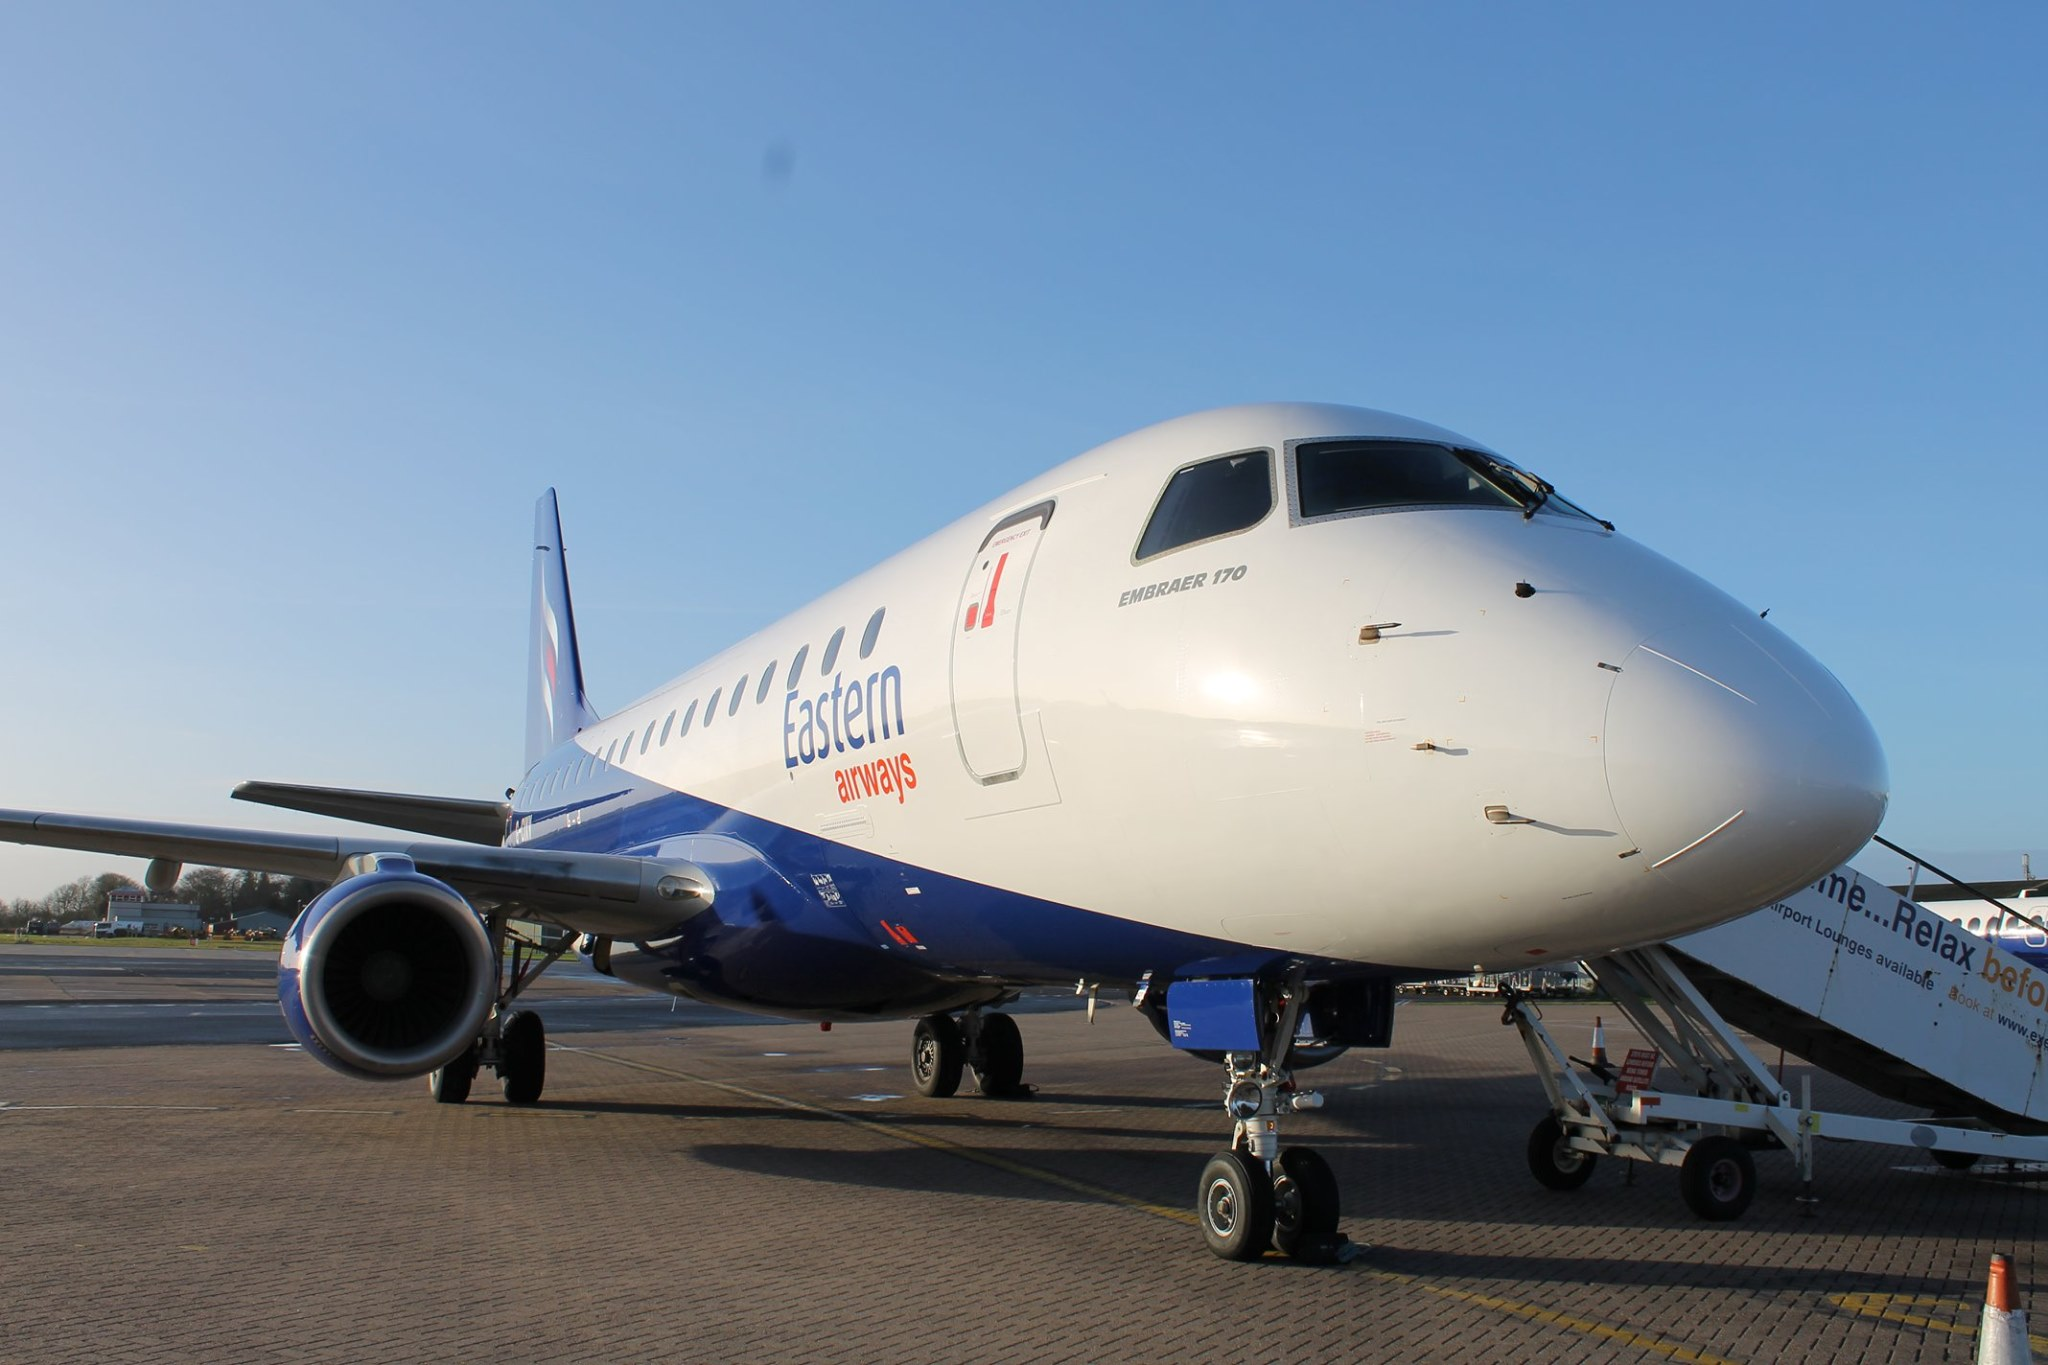 Eastern Airways Launch UK to Paris flights from East Midlands, Southampton and Cardiff!